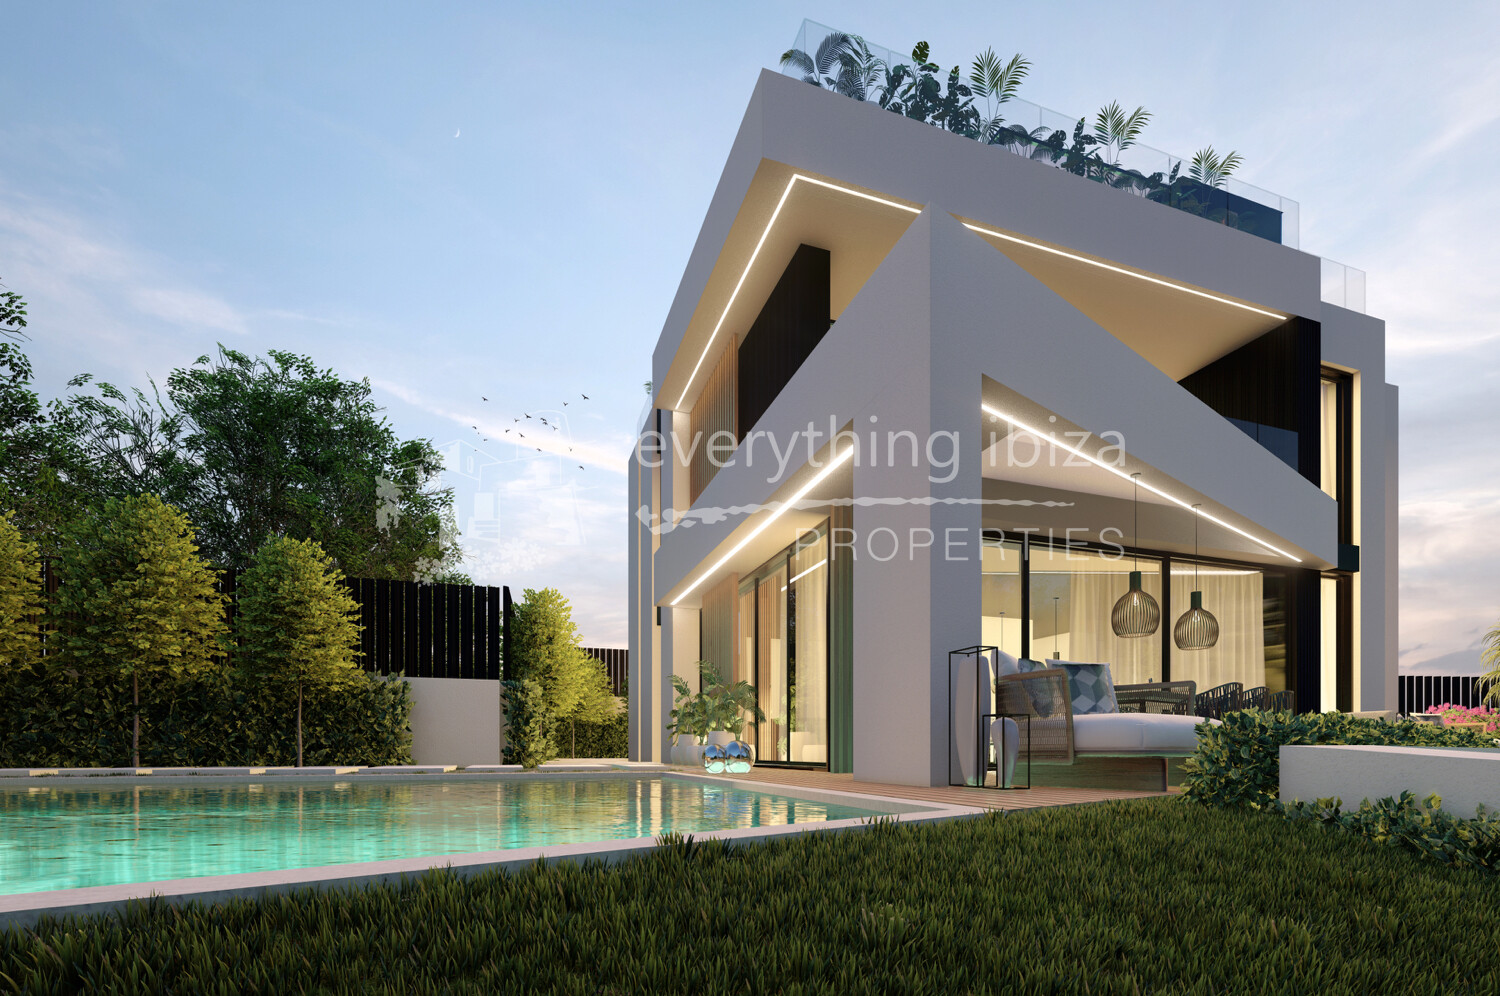 Luxury Brand New Villa with Sea View Roof Terrace, ref 1660, for sale in Ibiza by everything ibiza Properties